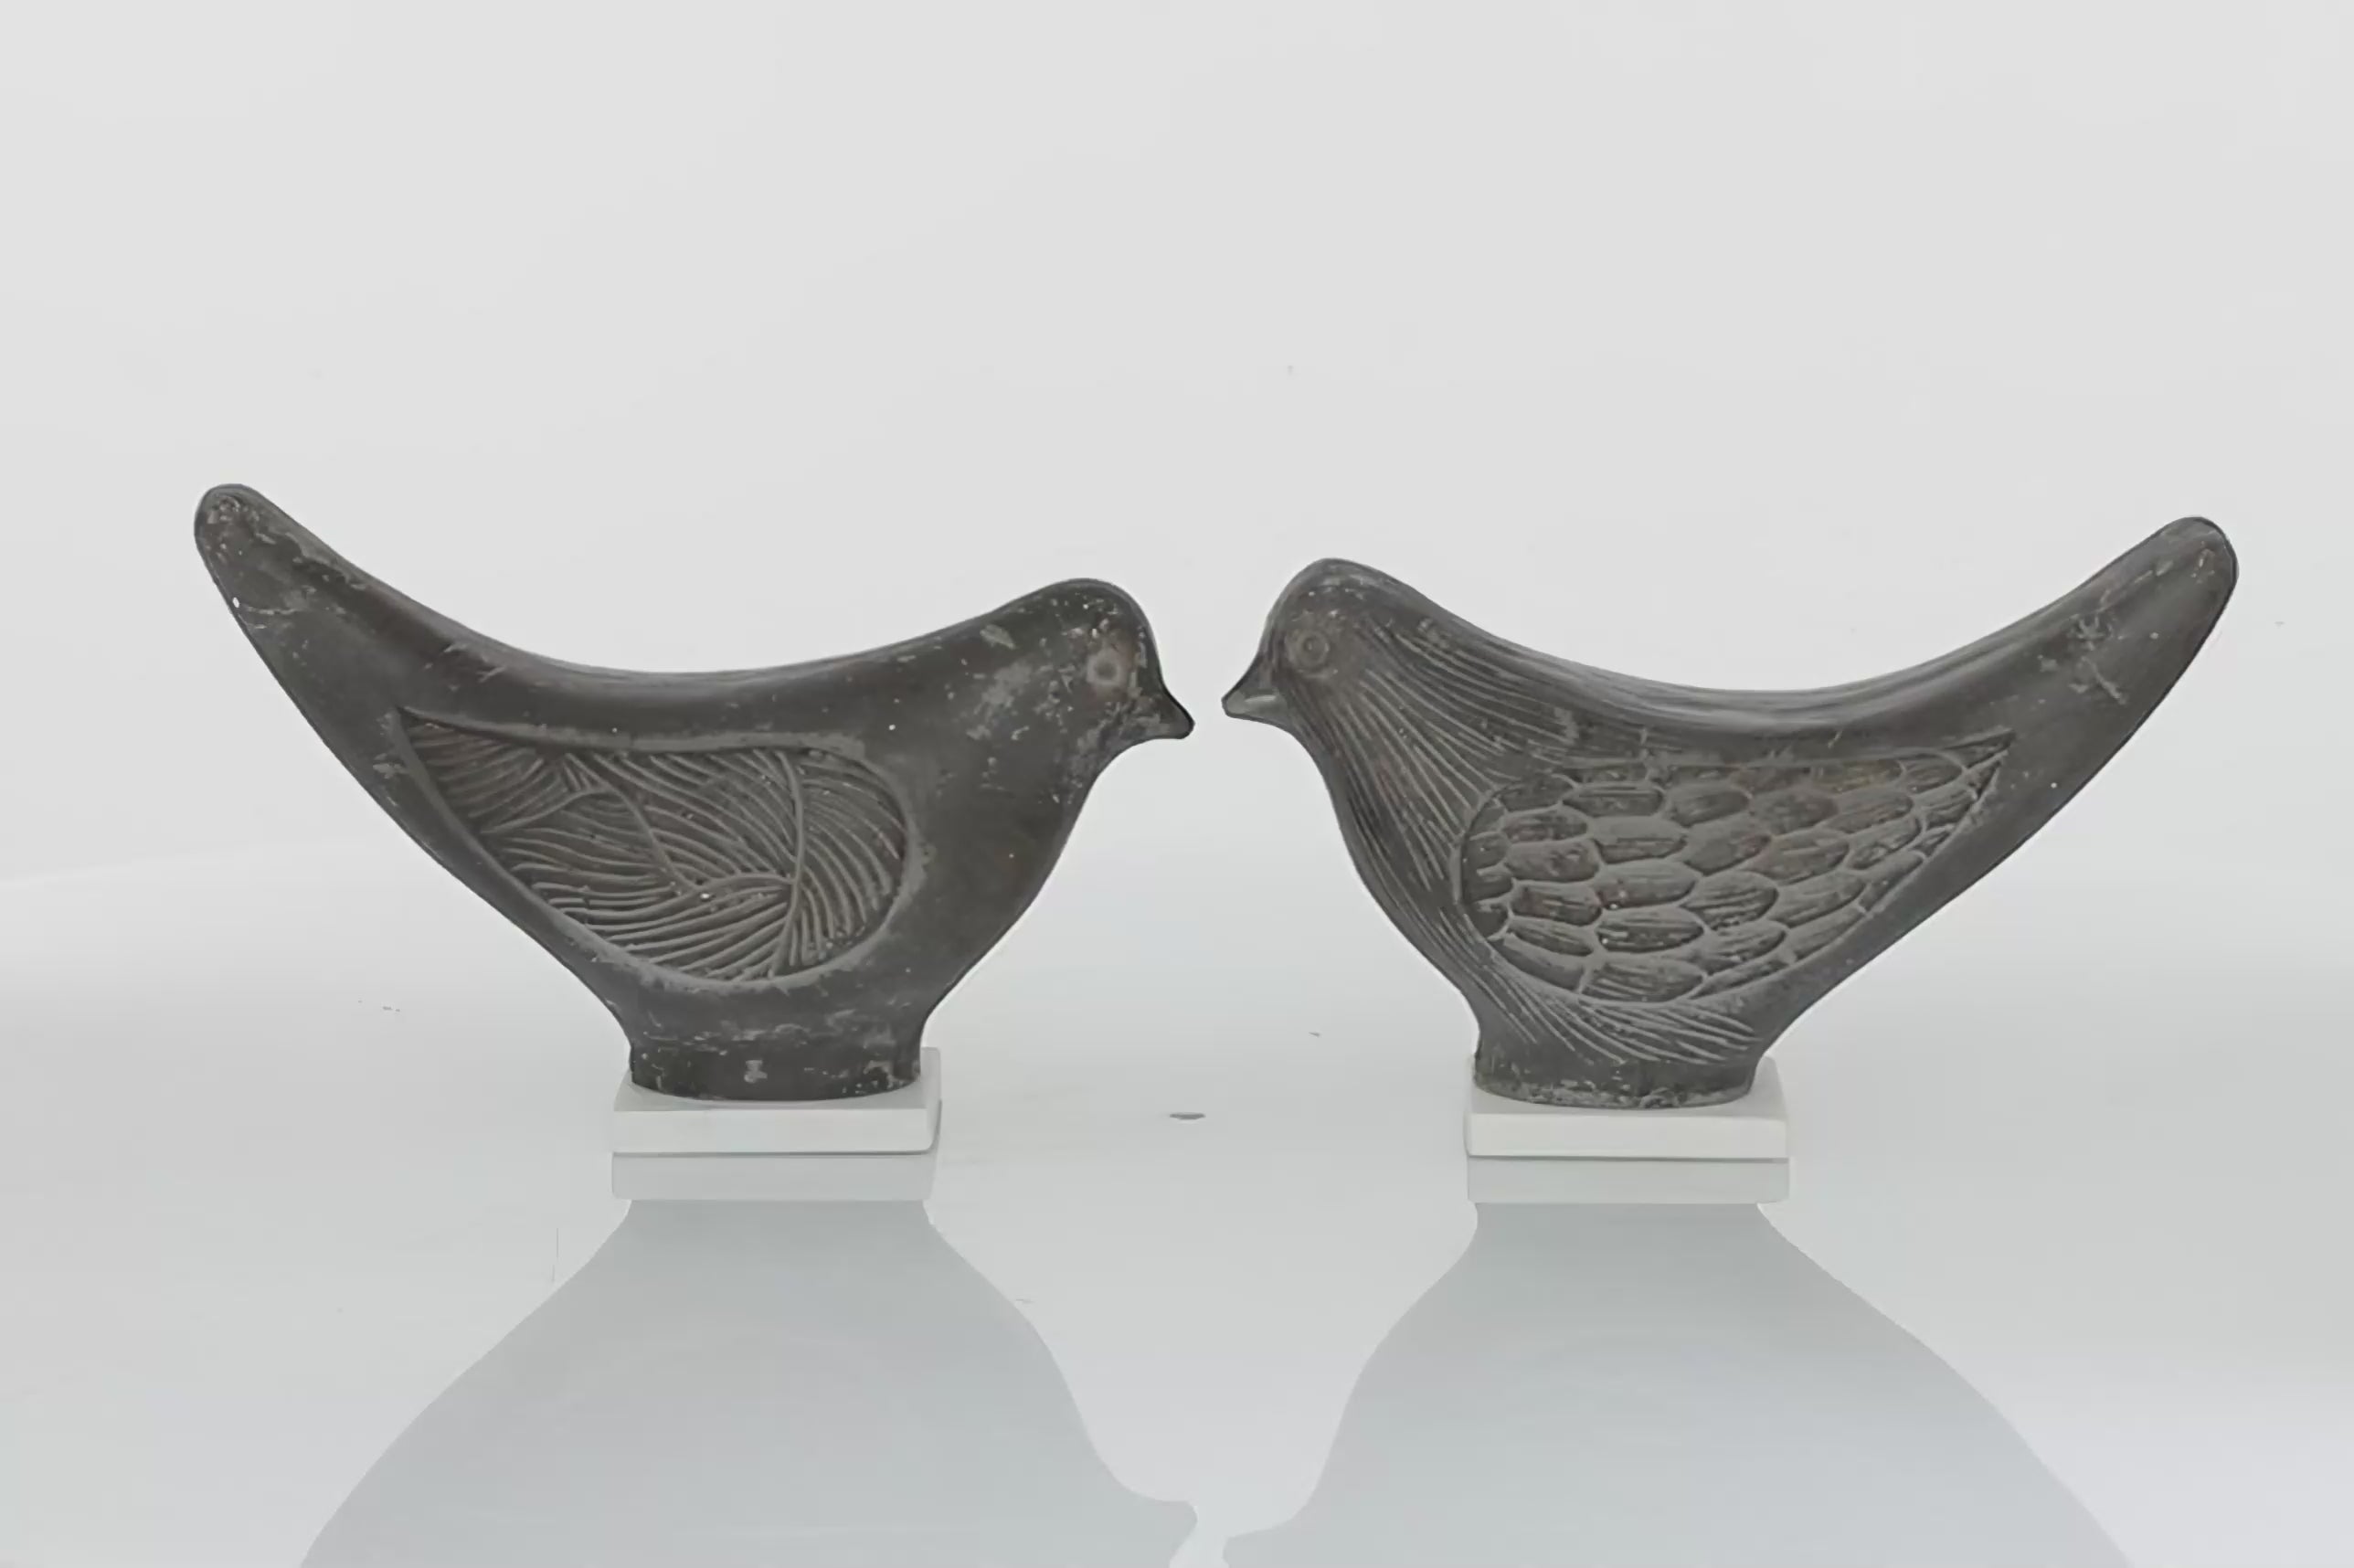 Set of two grey bird figurines textured on the face, wing and tail areas. Textures are in gold color. Birds are placed on the squared white marble stand. Birds are facing each other and spinning in 360 degrees. Background is all white